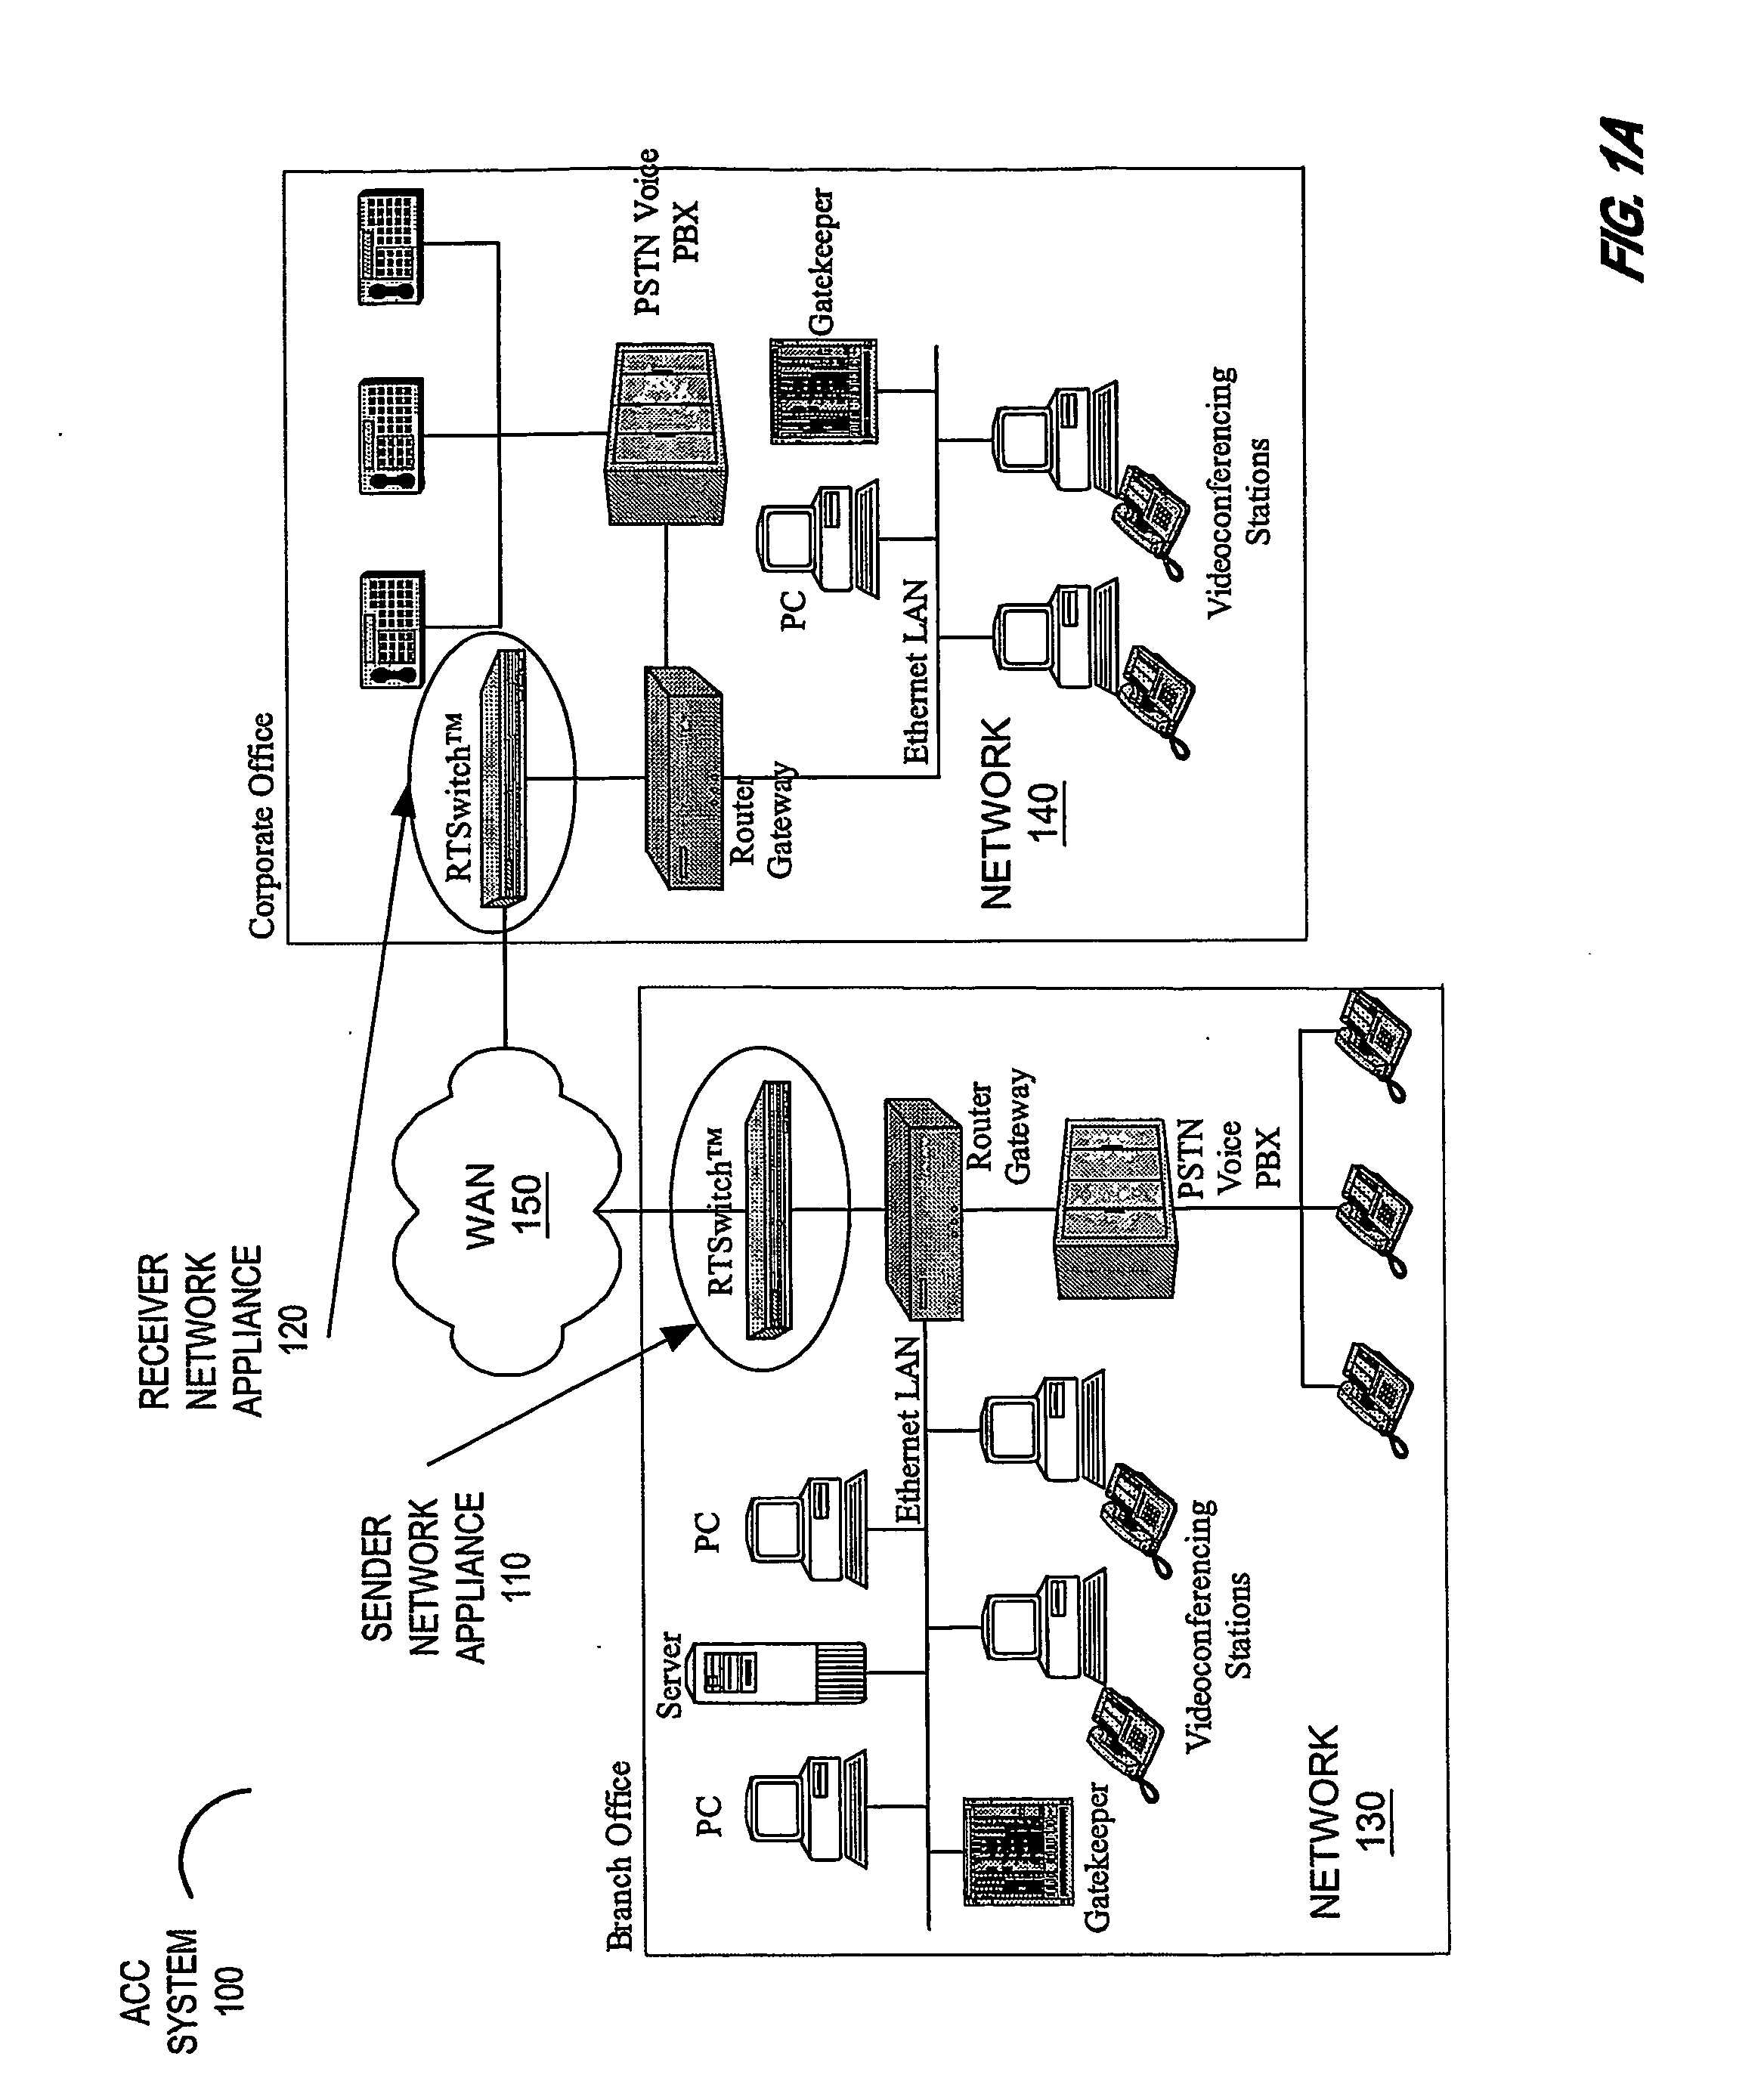 System for actively controlling distributed applications